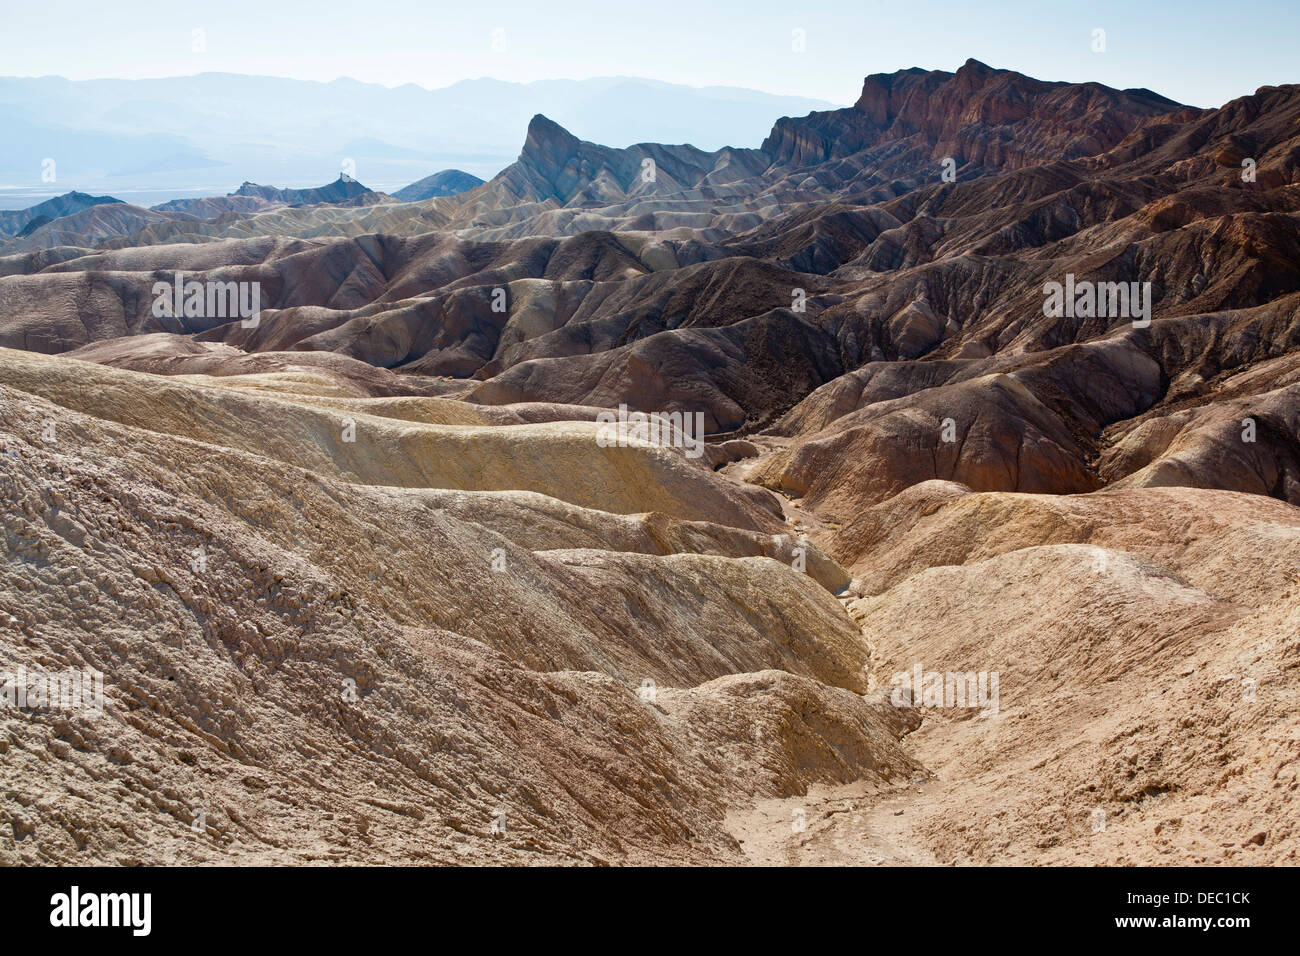 Landscape at Zabriskie Point with Manly Beacon in the distance, Death Valley, California, USA. JMH5370 Stock Photo